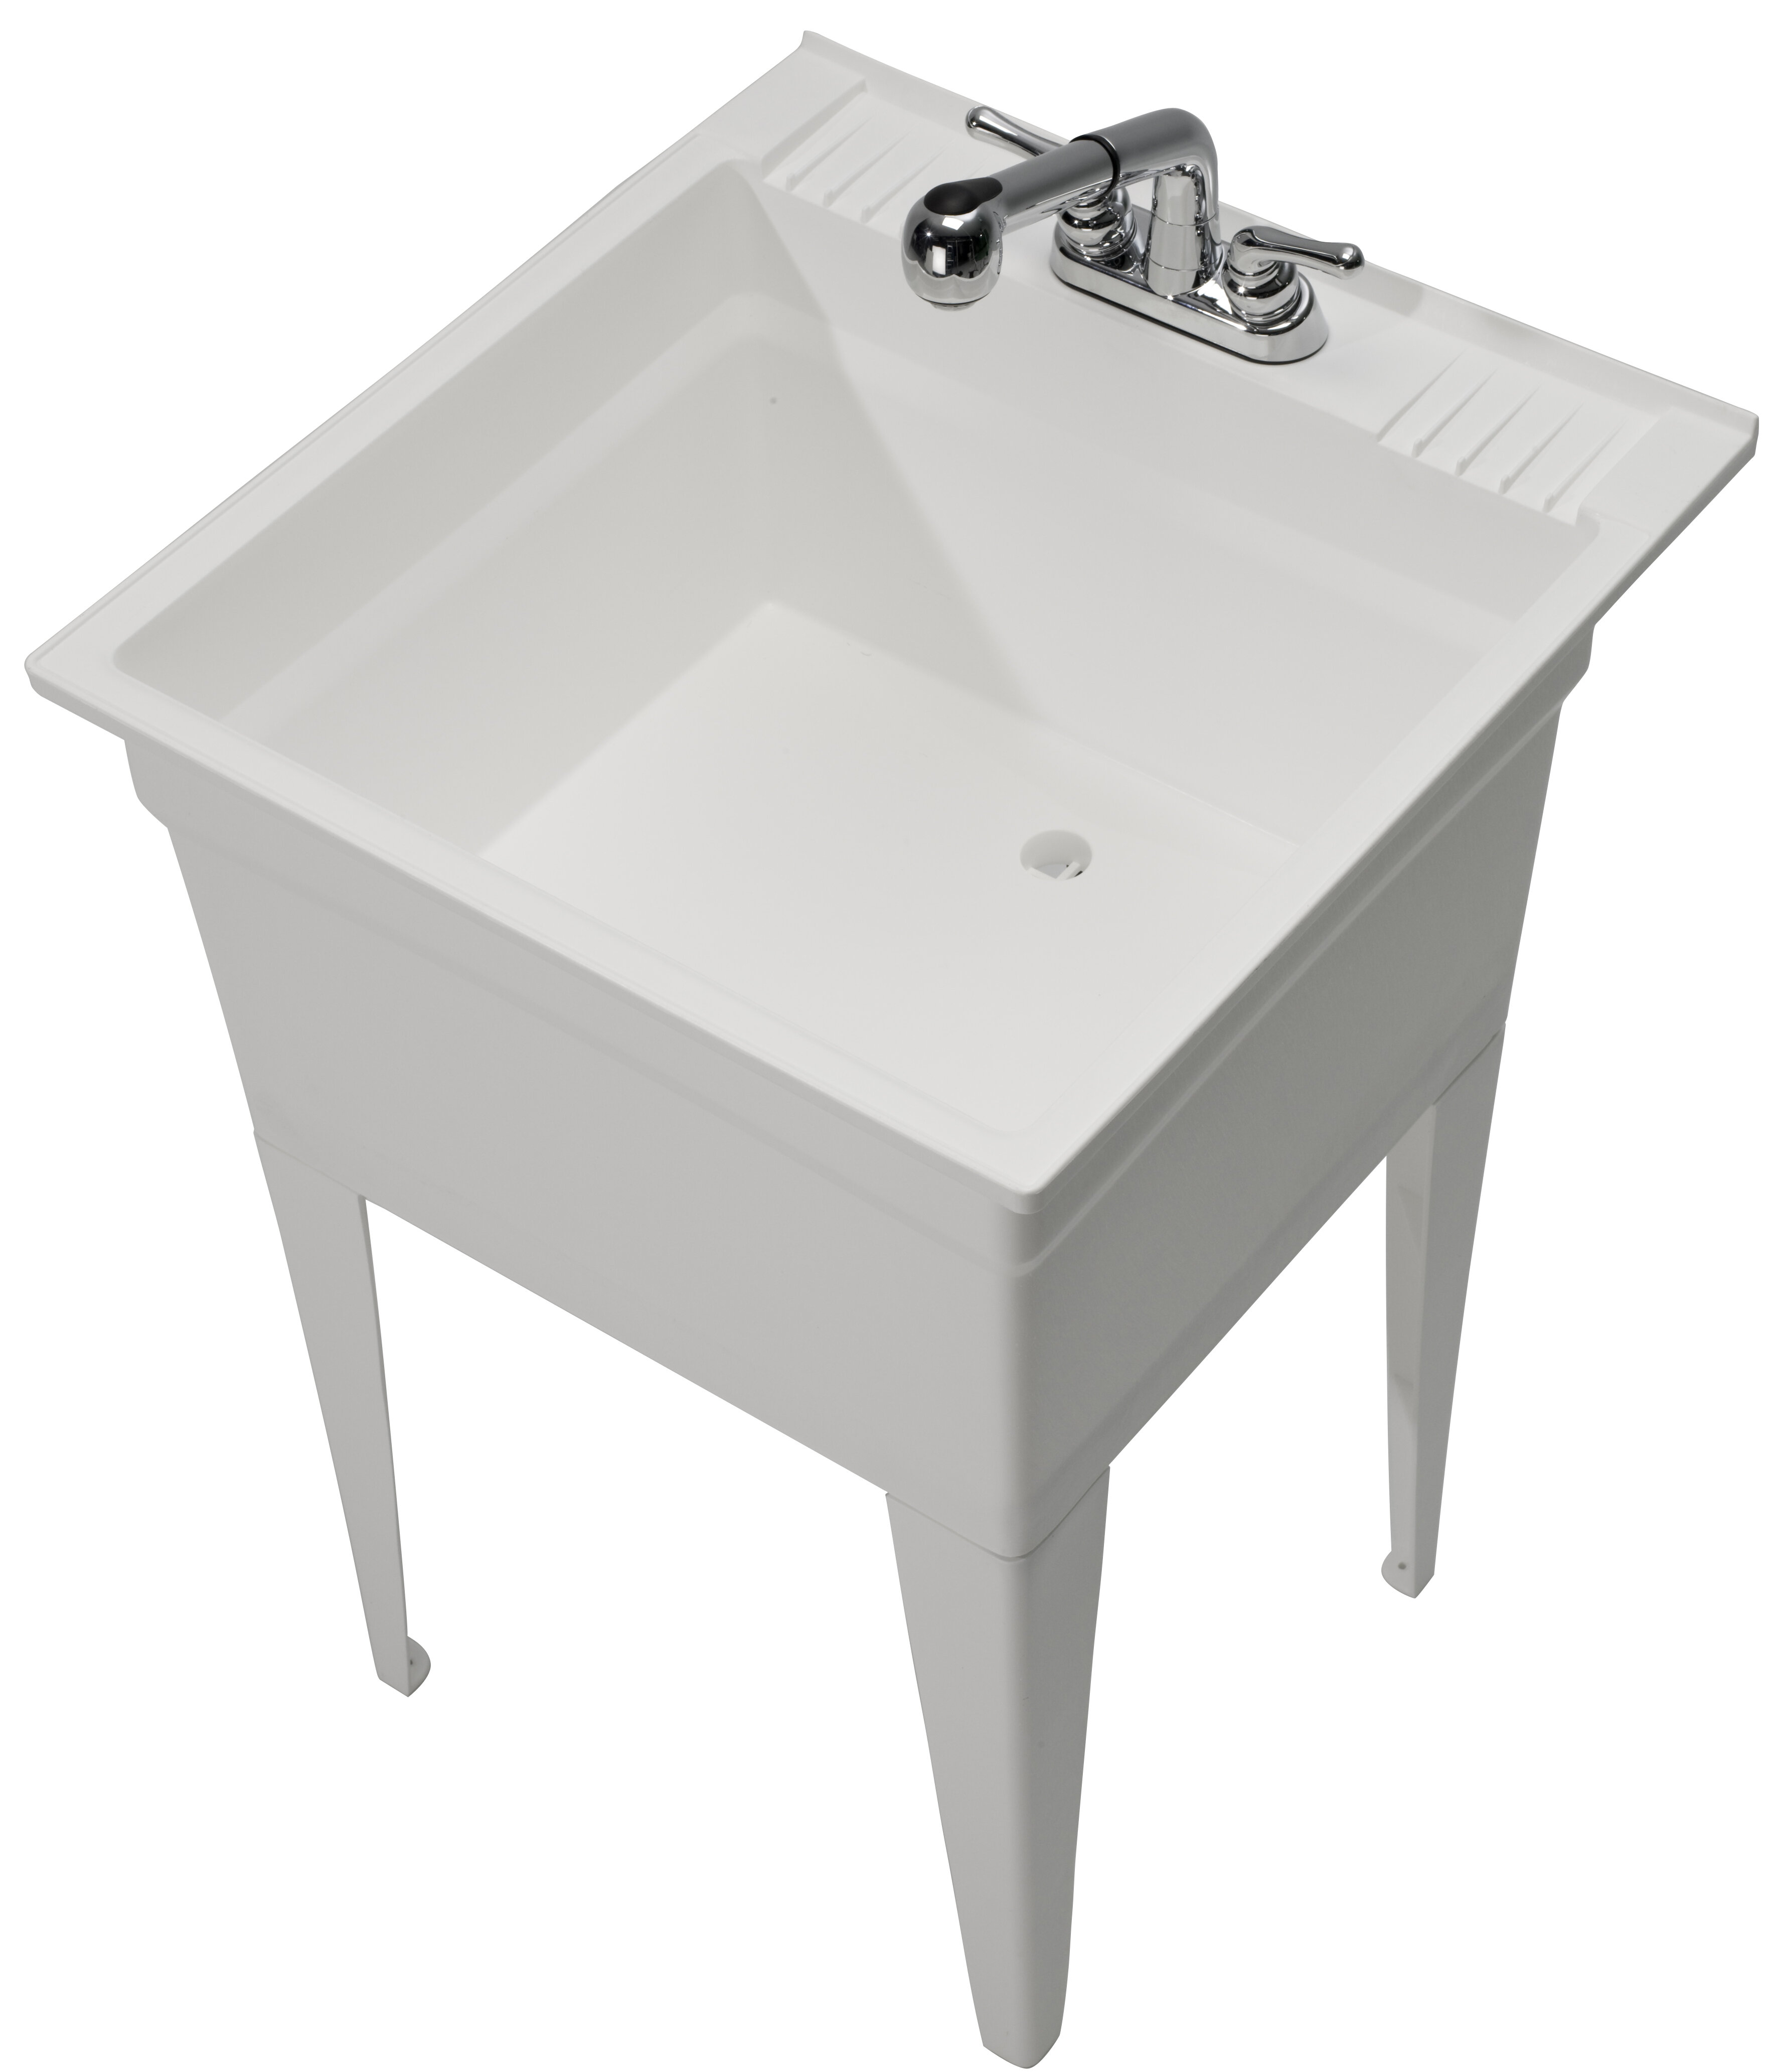 Heavy Duty 23 75 X 24 75 Freestanding Laundry Sink With Faucet